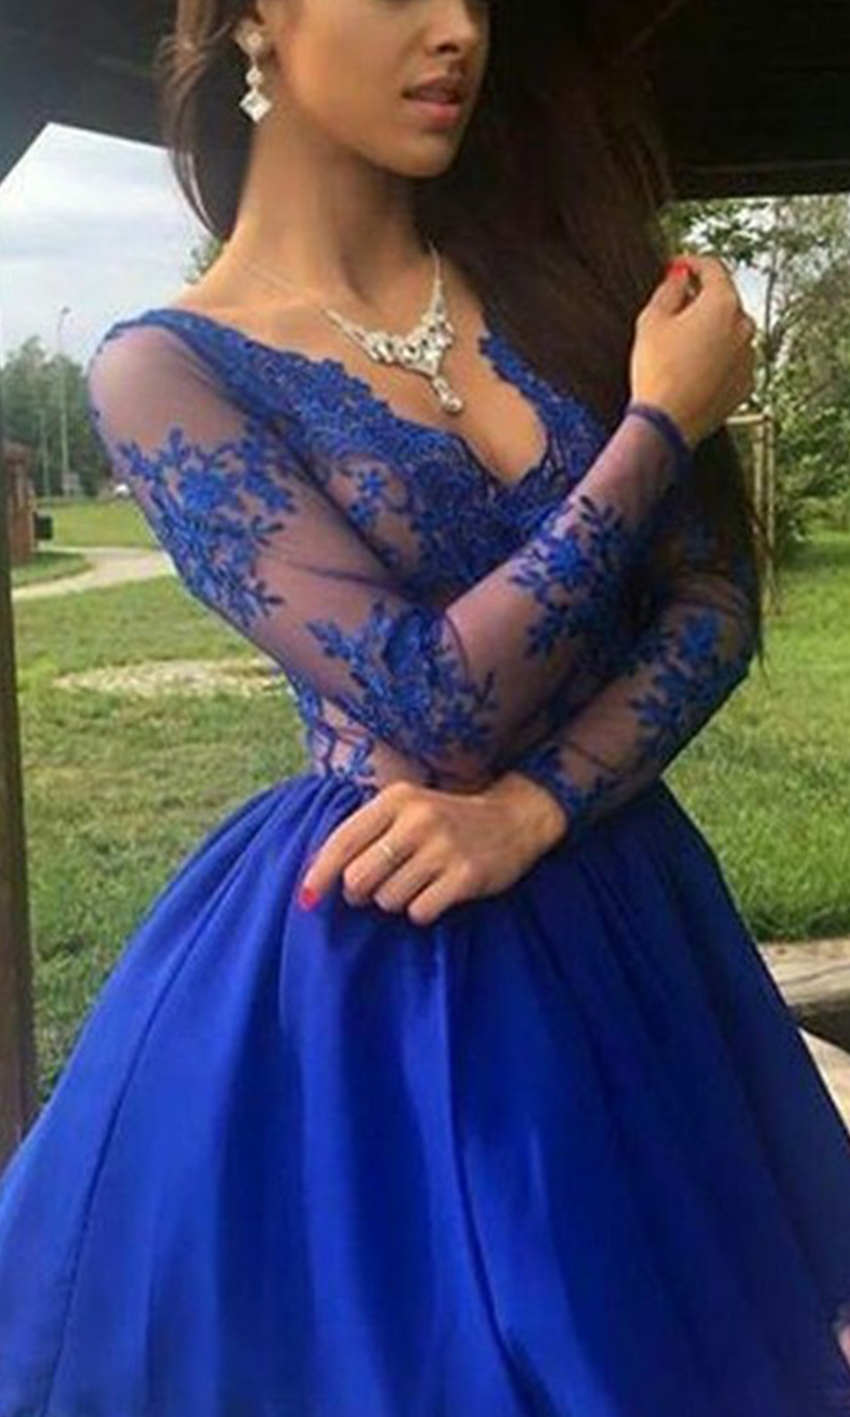 Blue V-neck Lace Prom Dresses Long Sleeves in Knee Length P516